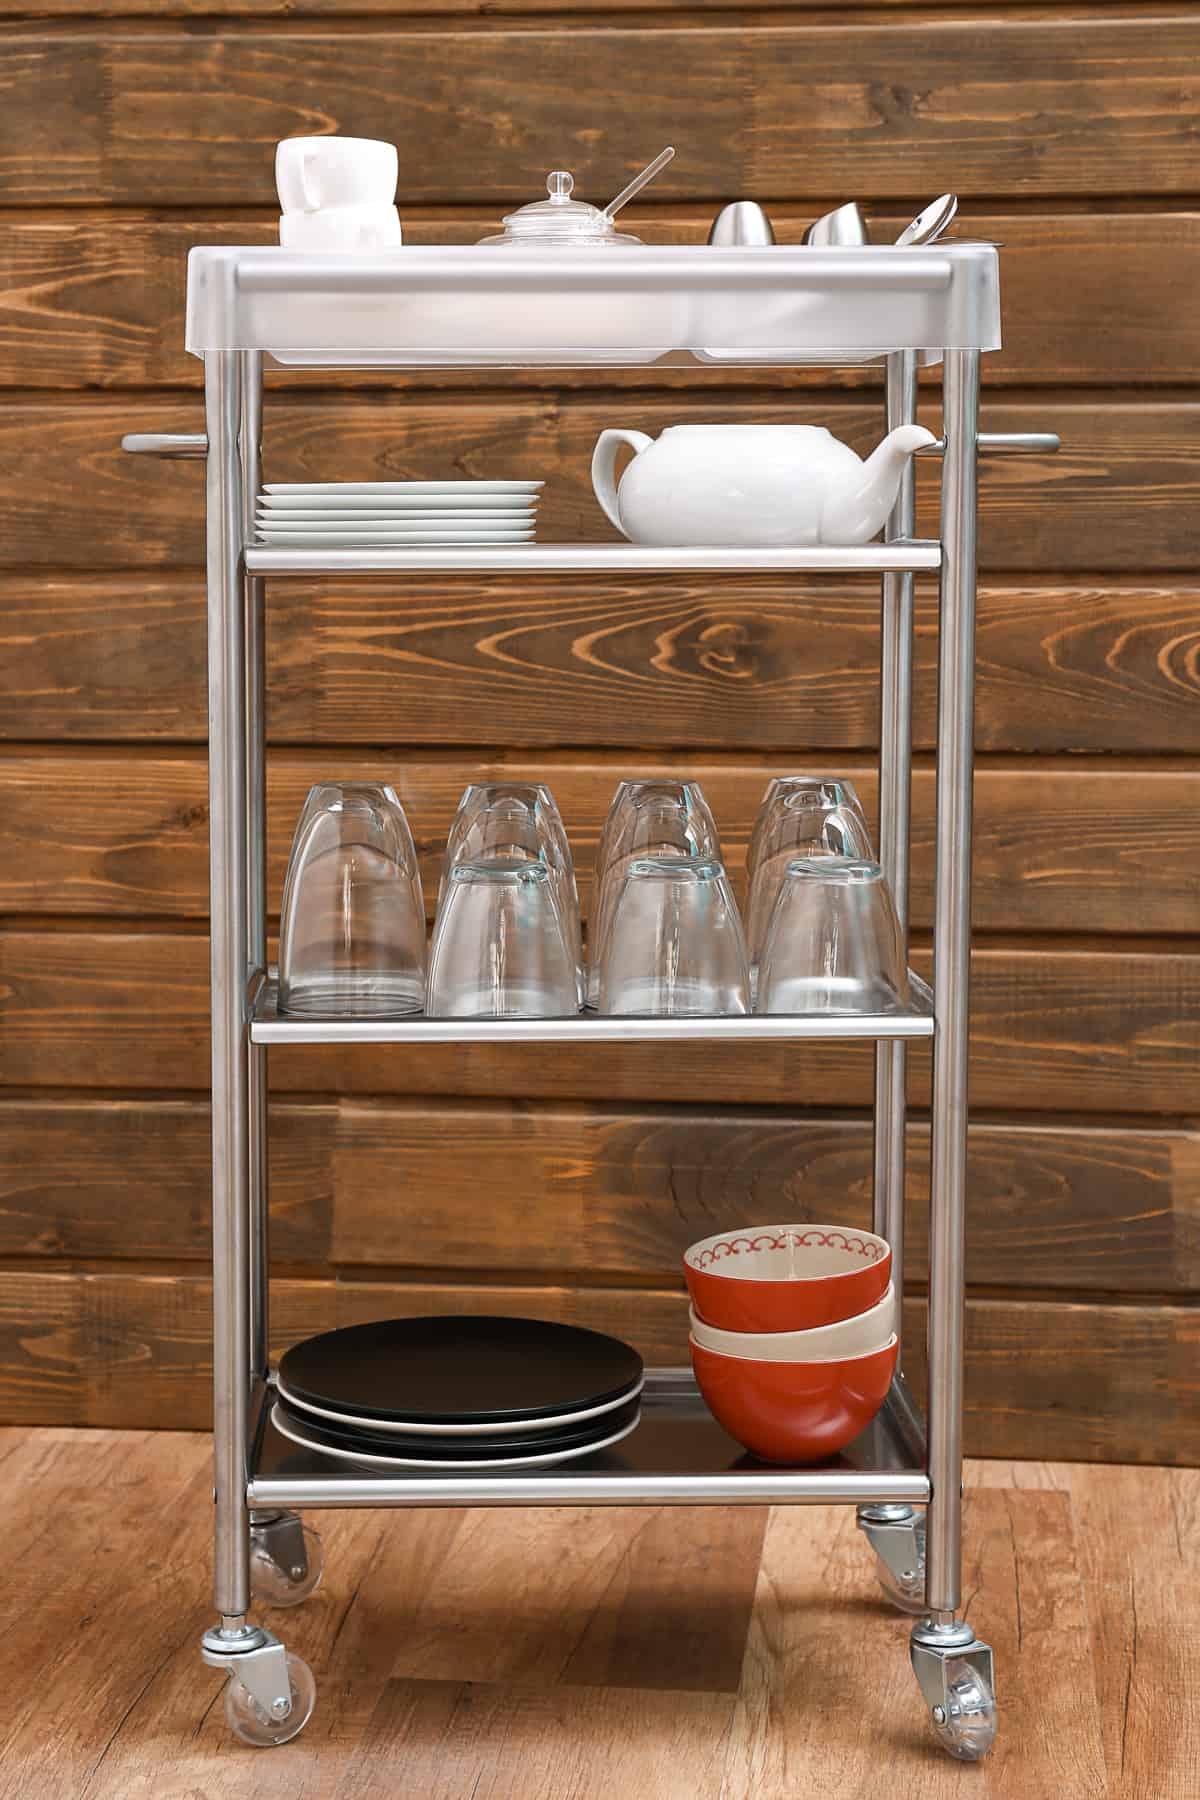 rolling metal utility cart filled with kitchen items for extra storage